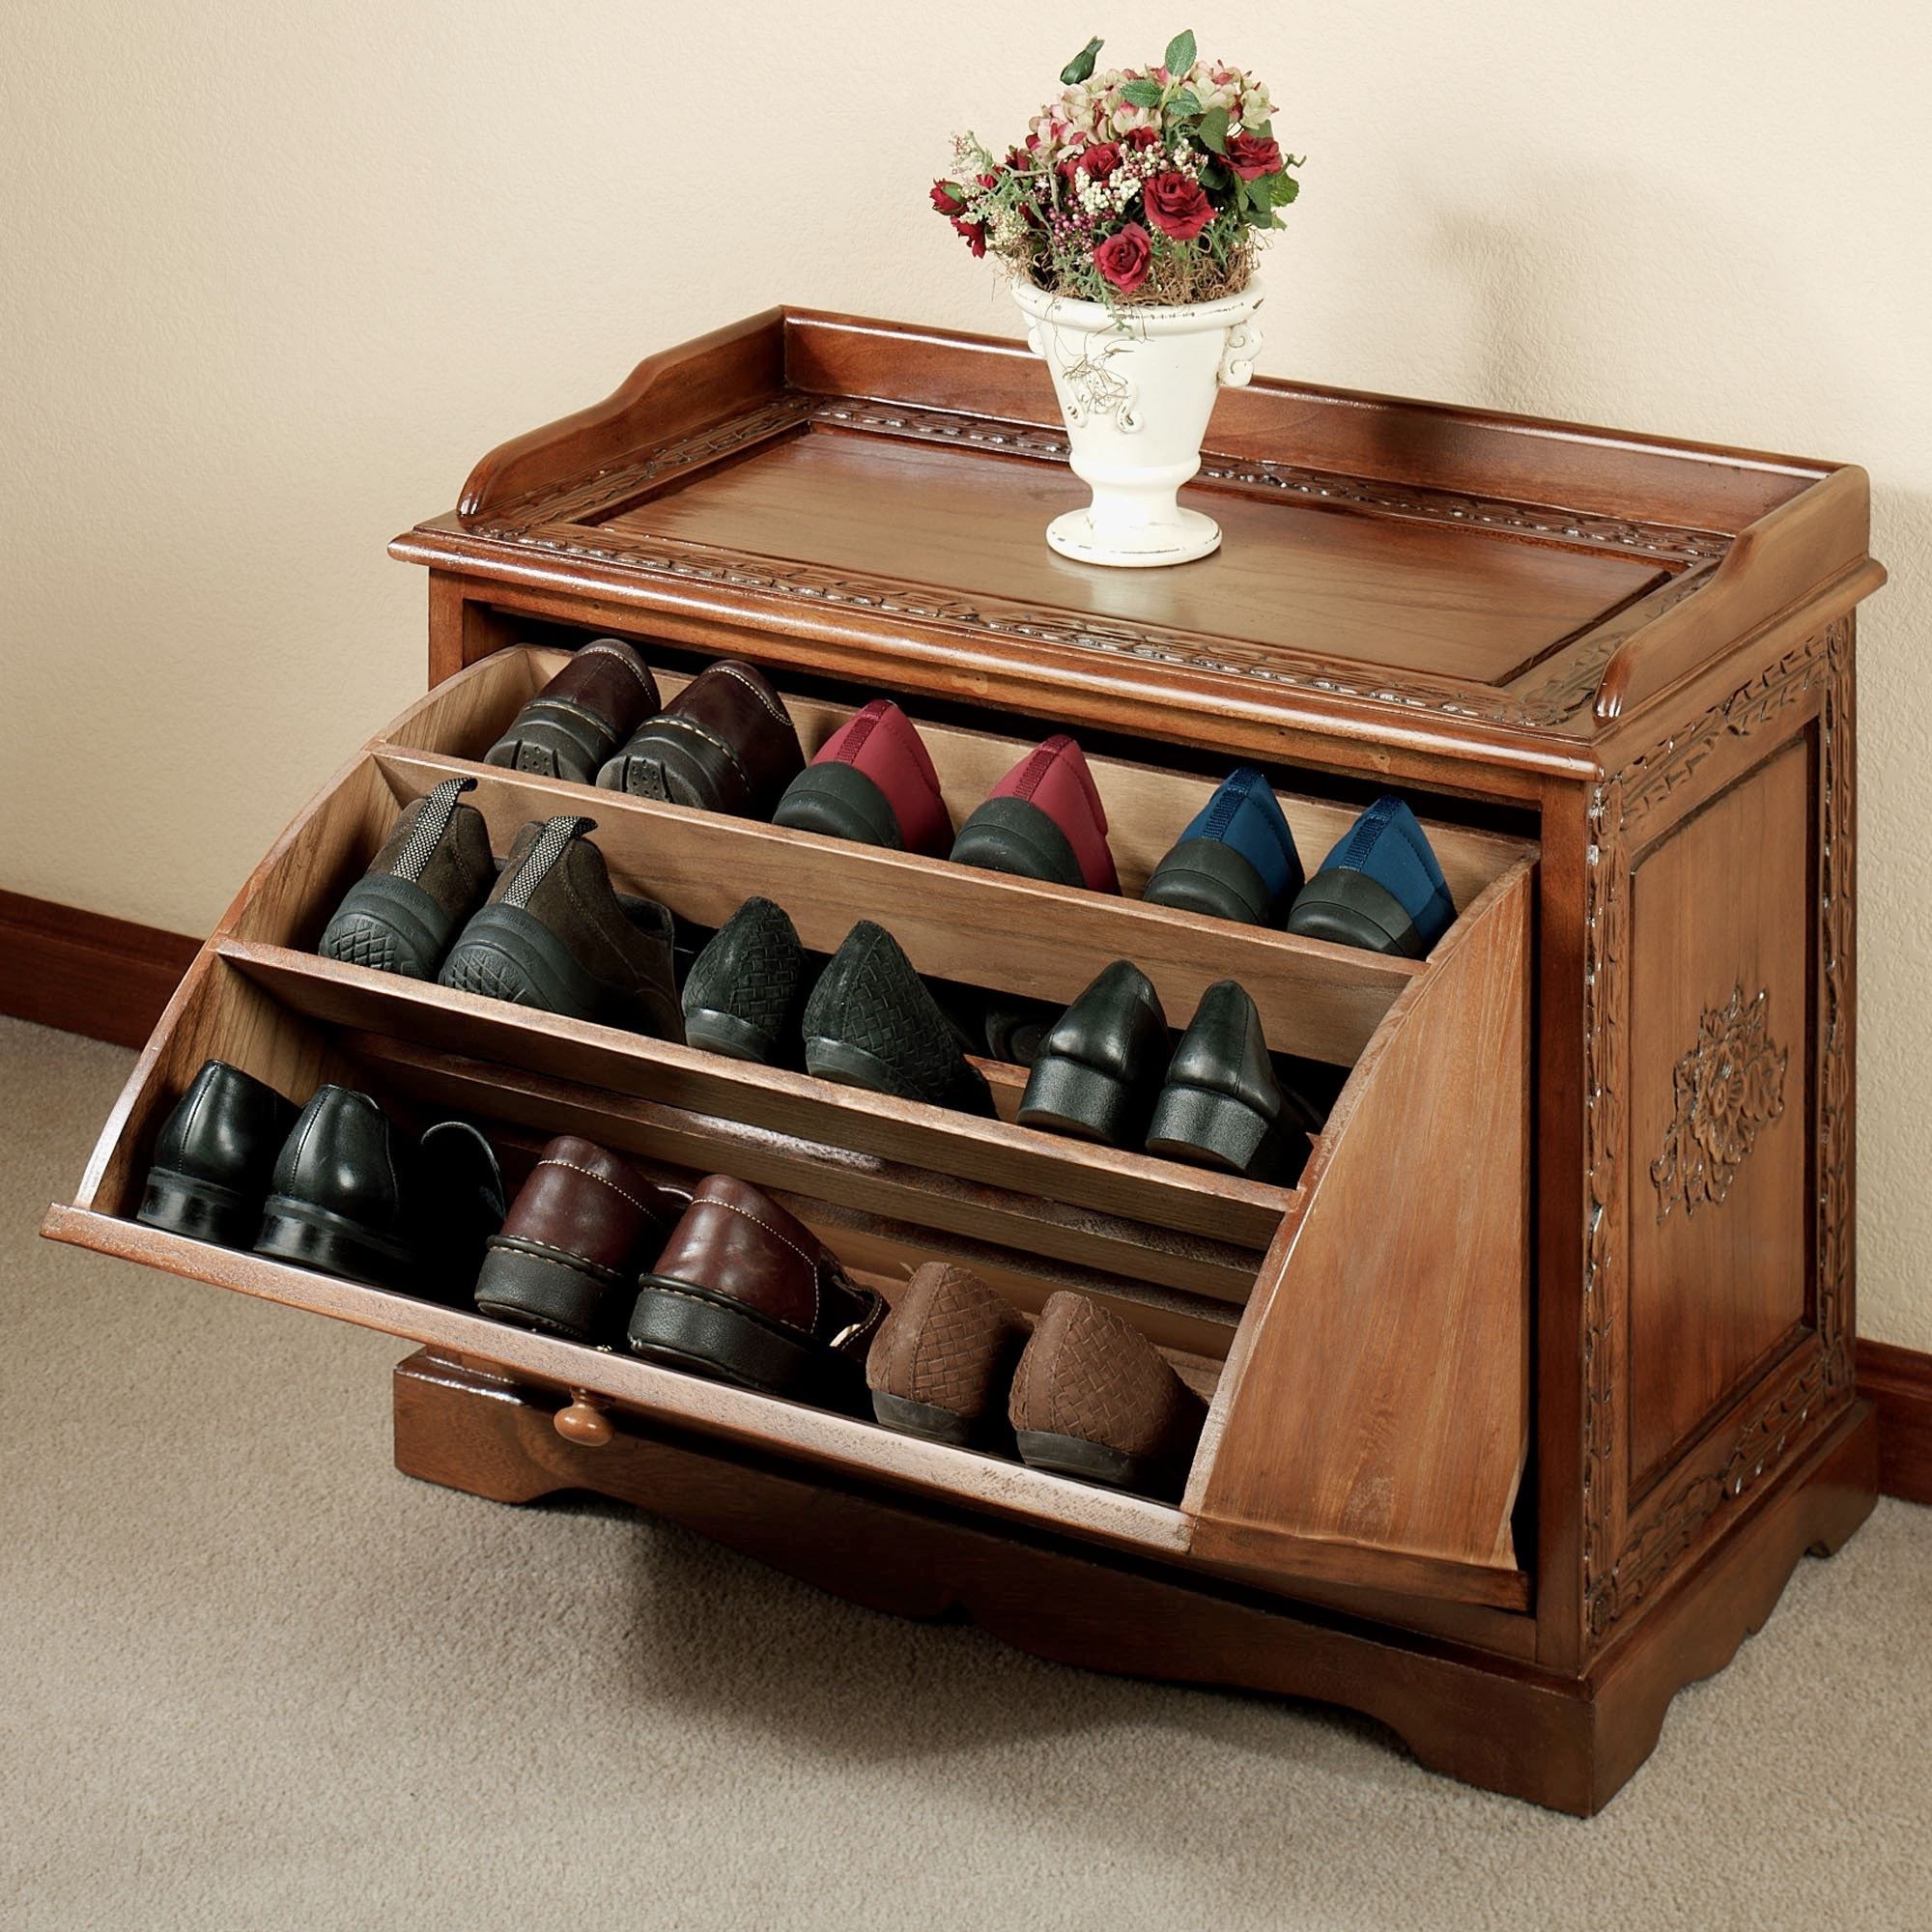 How to make a shoe storage cabinet